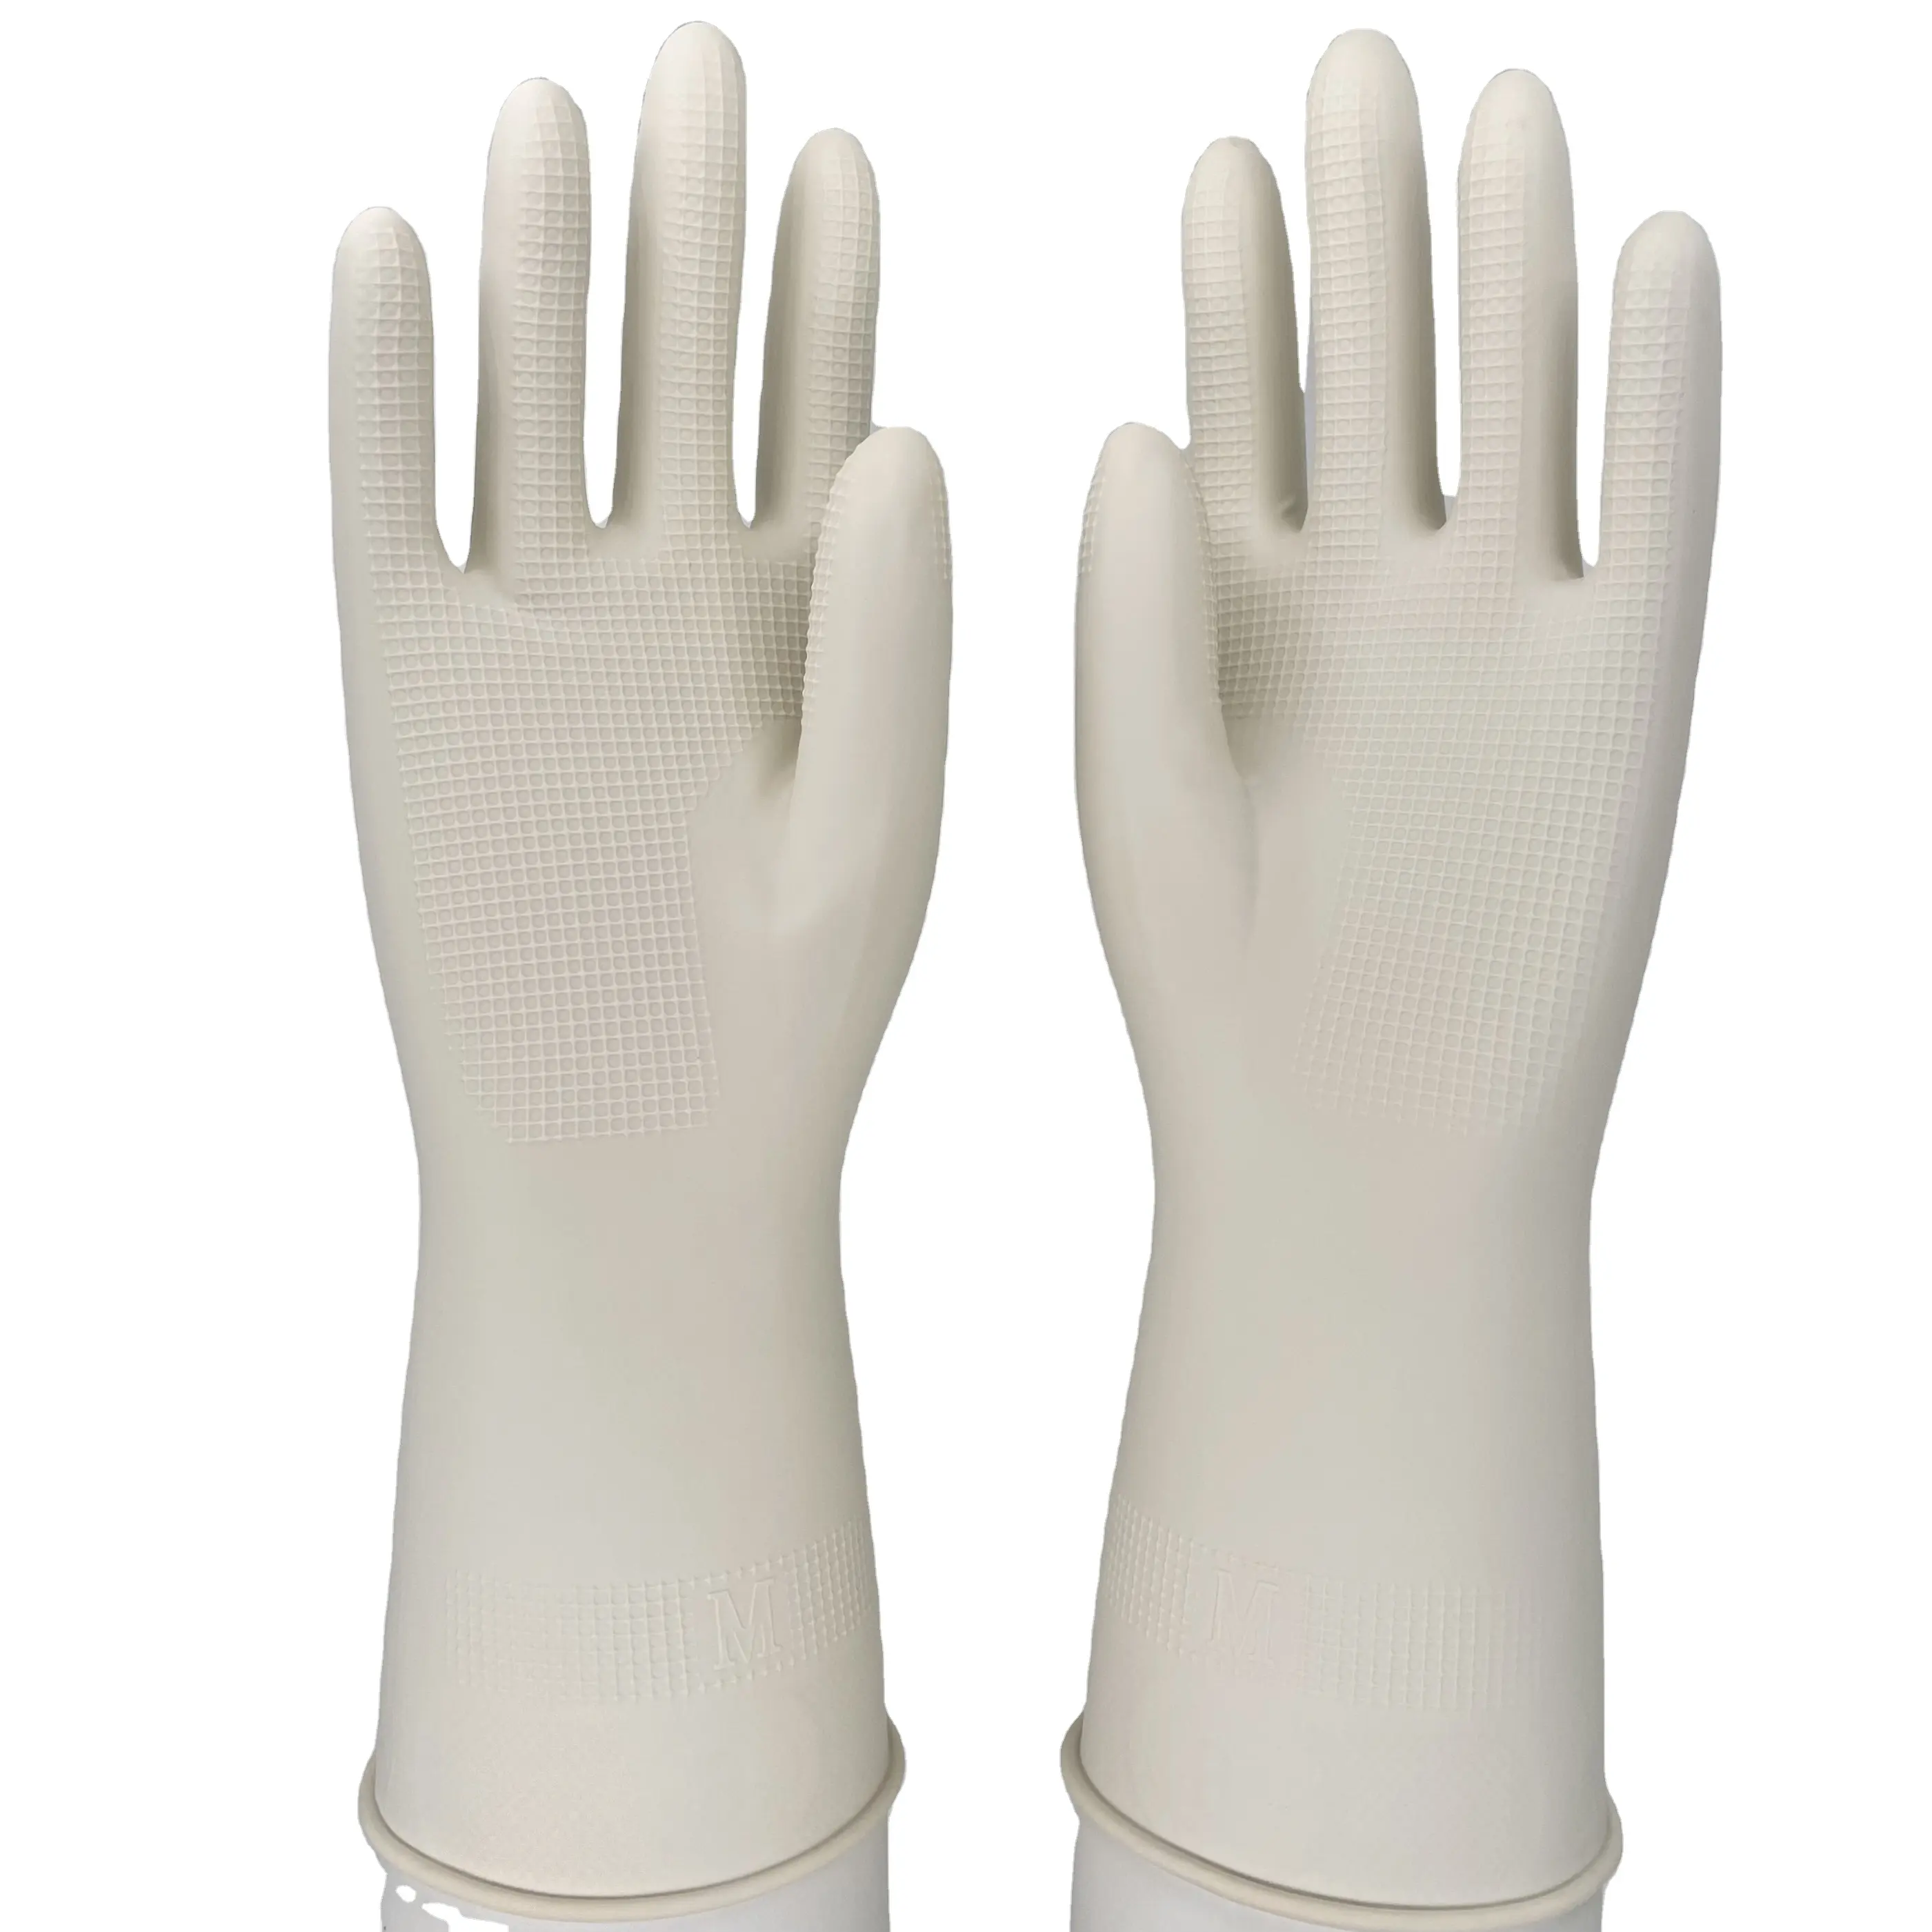 New White Dazzling Finger Nimble Protect Hand Gloves Waterproof Durable Kitchen Dishwashing Latex Cleaning Housework